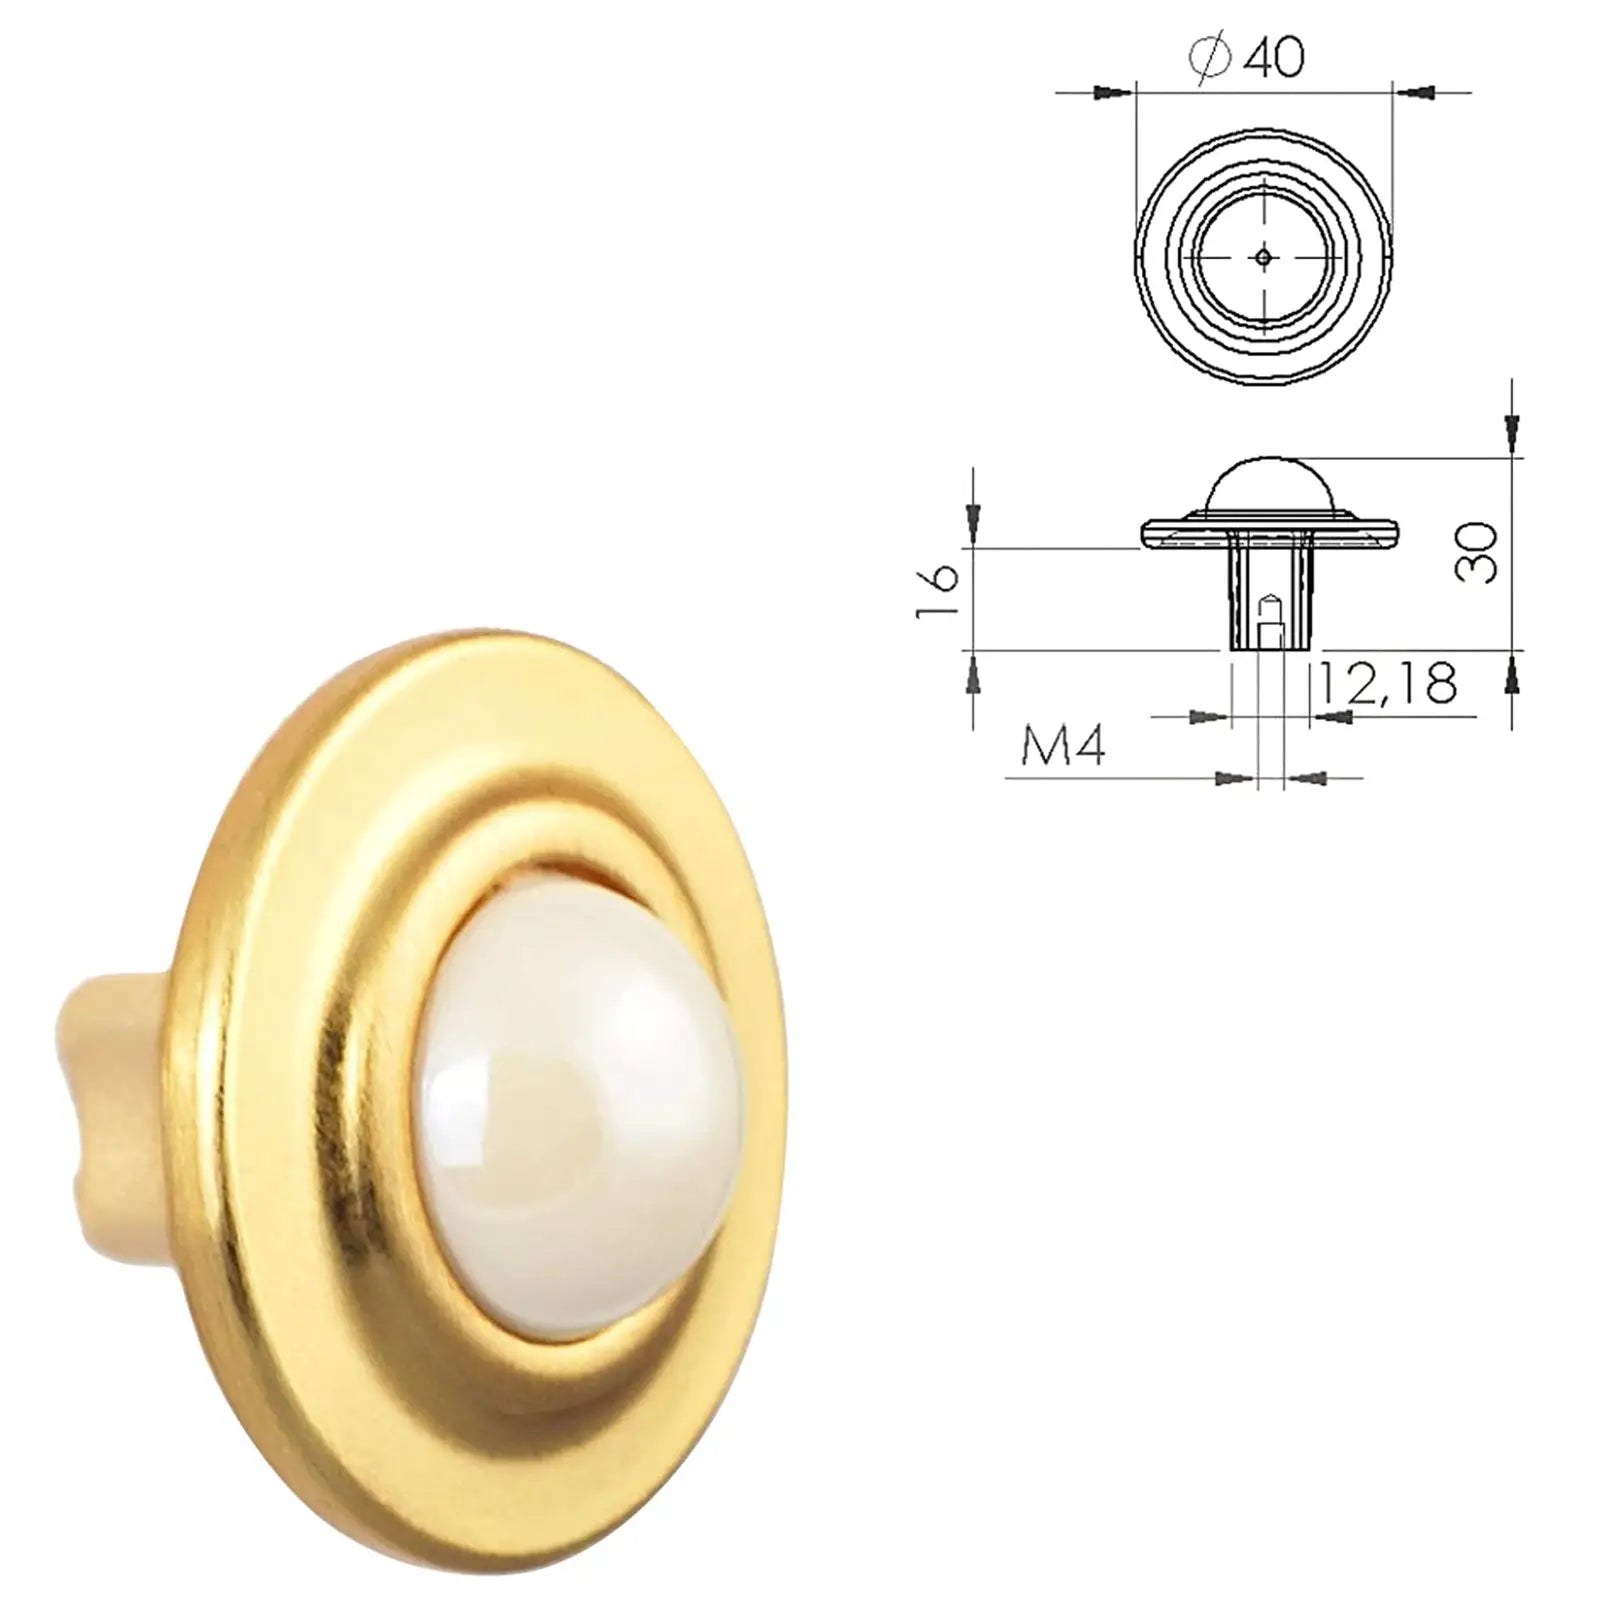 Pearl Contemporary Handle And Knob To Match - Decor And Decor